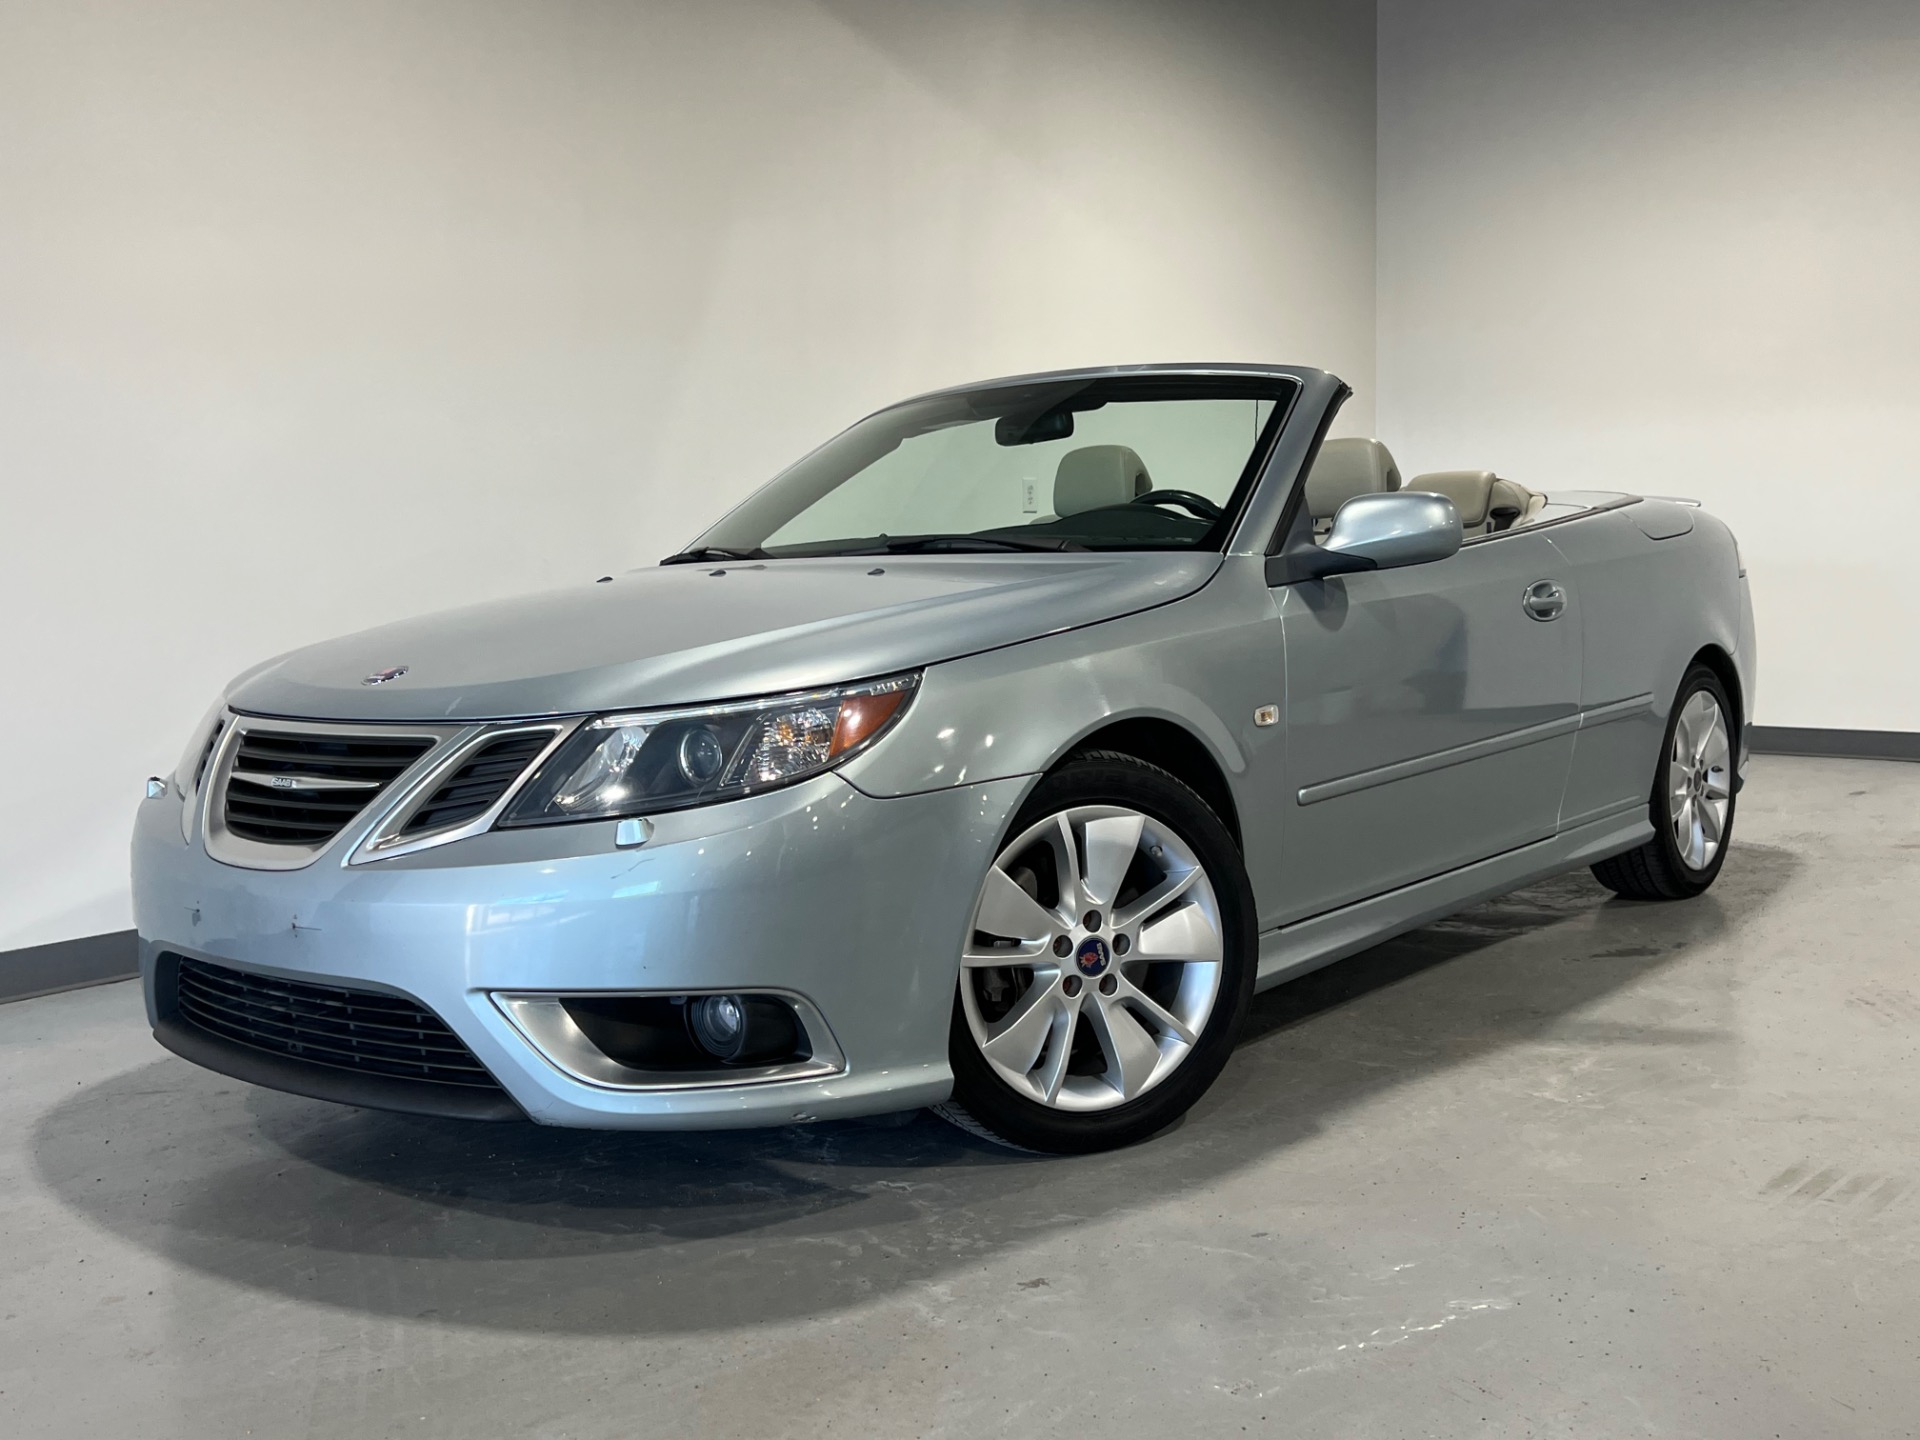 Used Saab 9-3 Convertible (2003 - 2011) Review